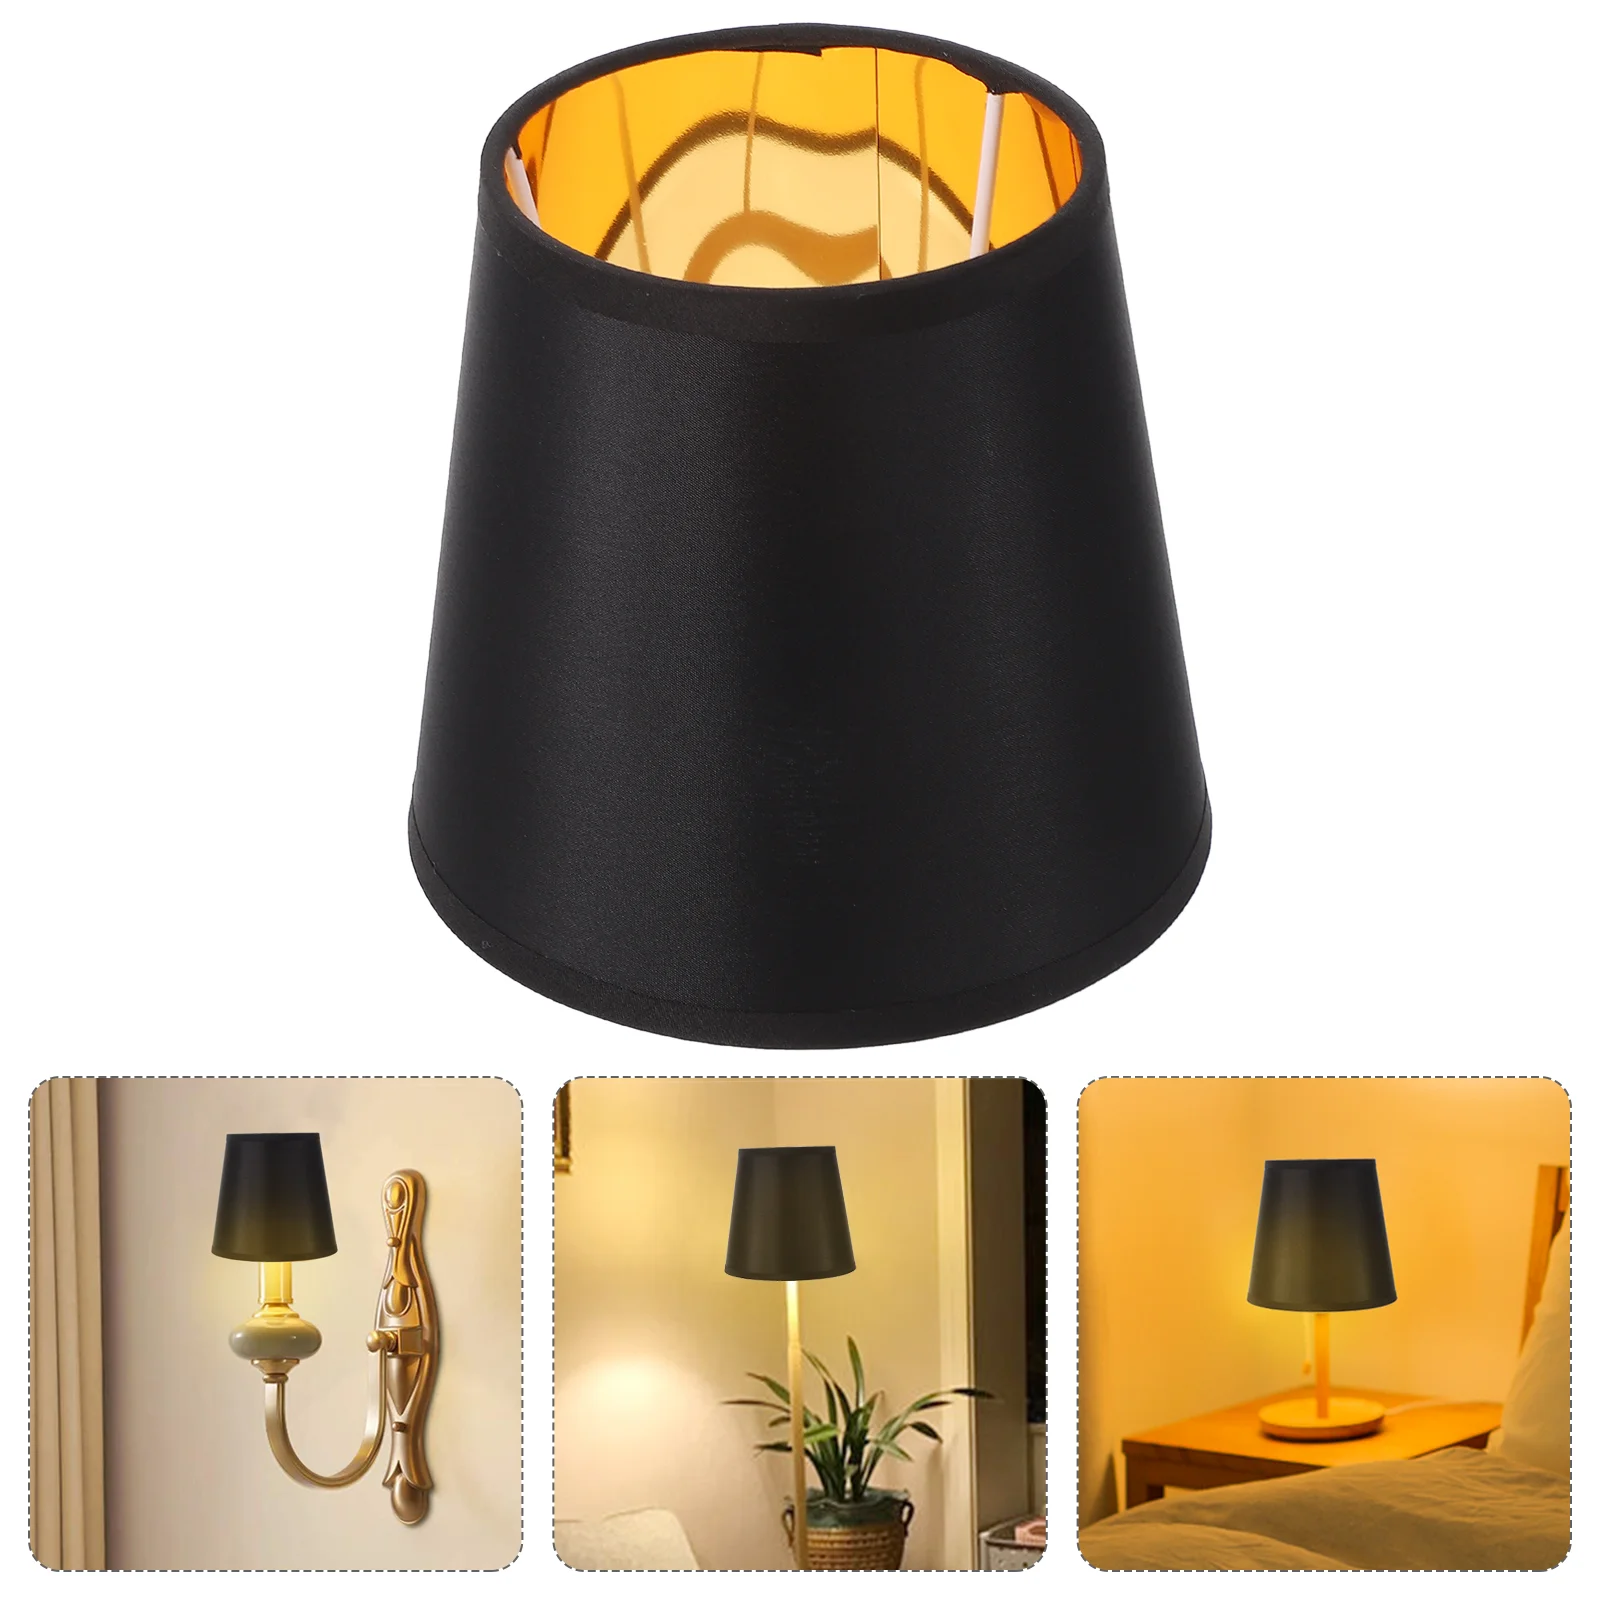 

Black Lampshade Cloth Lamp Shade E14 Base Golden Lining Fabric Lampshade Screw Lamp Cover Home Table Lamp Floor Light Small